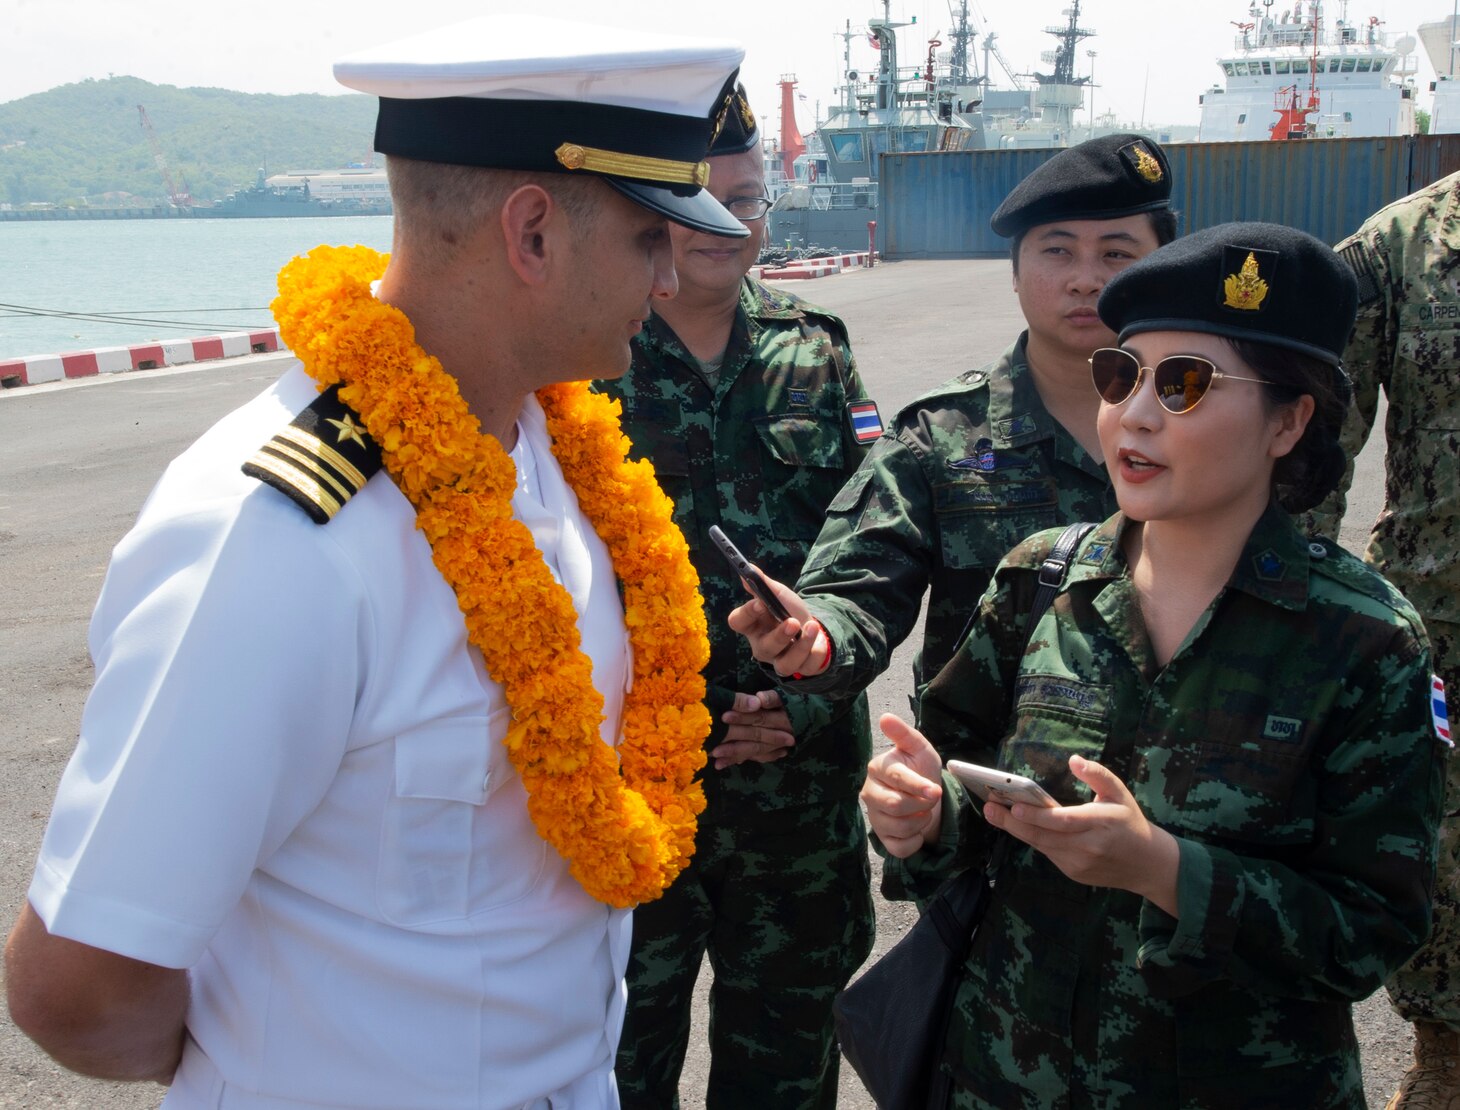 Sattahip, Thailand (May 18, 2019) – Royal Thai Navy 2nd Lt. Munlika Suwannasawad, Pacific Partnership 2019 (PP19) public relations officer, interviews U.S. Navy Lt. Cmdr. Nick Lyons, PP19 operations officer, following the arrival of the fast expeditionary transport ship USNS Fall River (T-EPF 4) in Thailand. Pacific Partnership, now in its 14th iteration, is the largest annual multinational humanitarian assistance and disaster relief preparedness mission conducted in the Indo-Pacific. Each year the mission team works collectively with host and partner nations to enhance regional interoperability and disaster response capabilities, increase security and stability in the region, and foster new and enduring friendships in the Indo-Pacific.